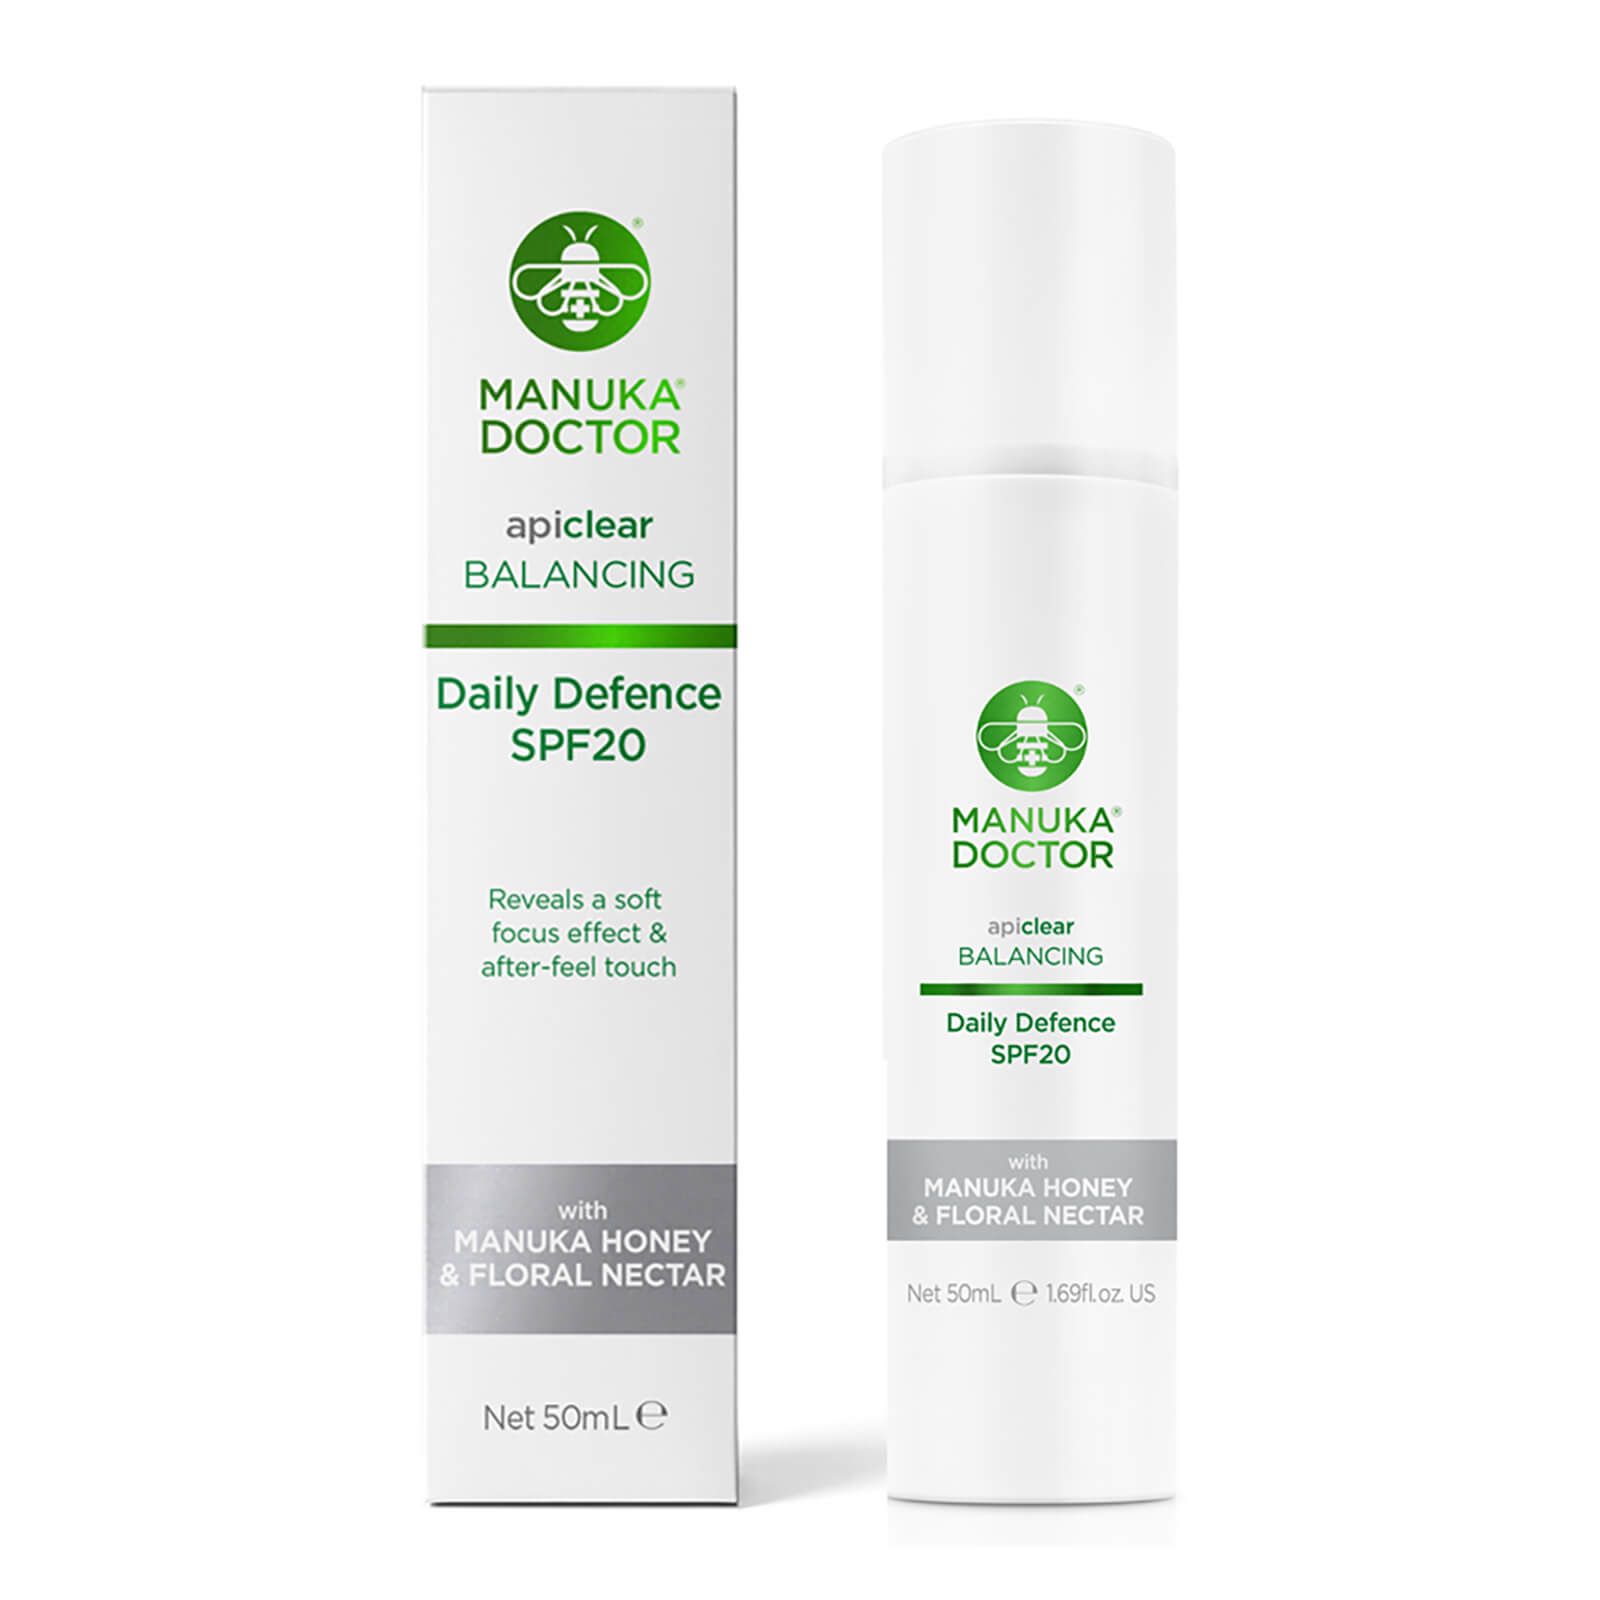 Manuka Doctor ApiClear Daily Defence SPF20 Cream | Look Fantastic (UK)